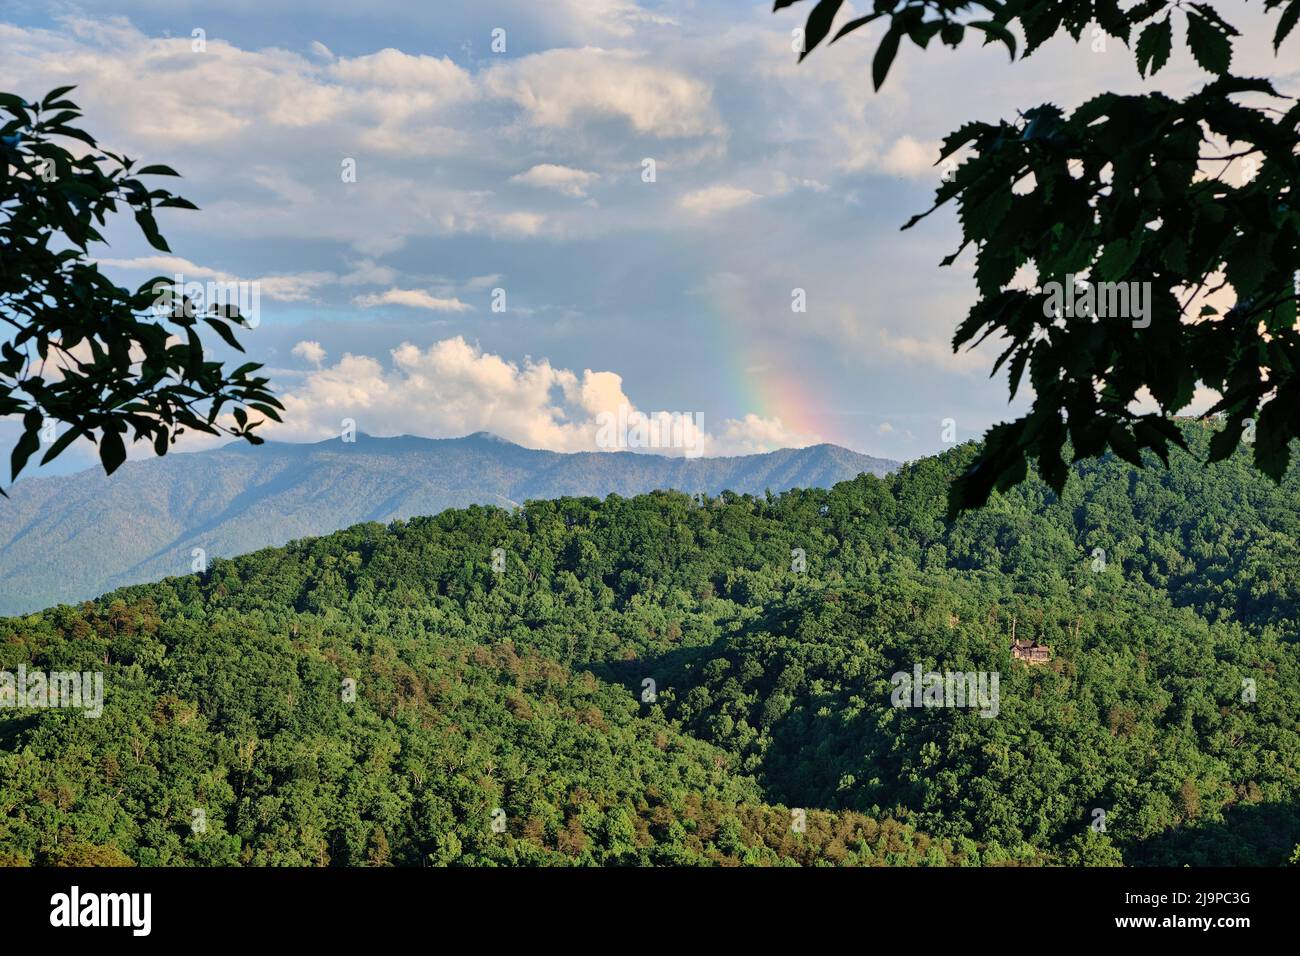 Great Smokey Mountains National Park with a rainbow, near Pigeon Forge and Gatlinburg Tennessee, USA. Stock Photo